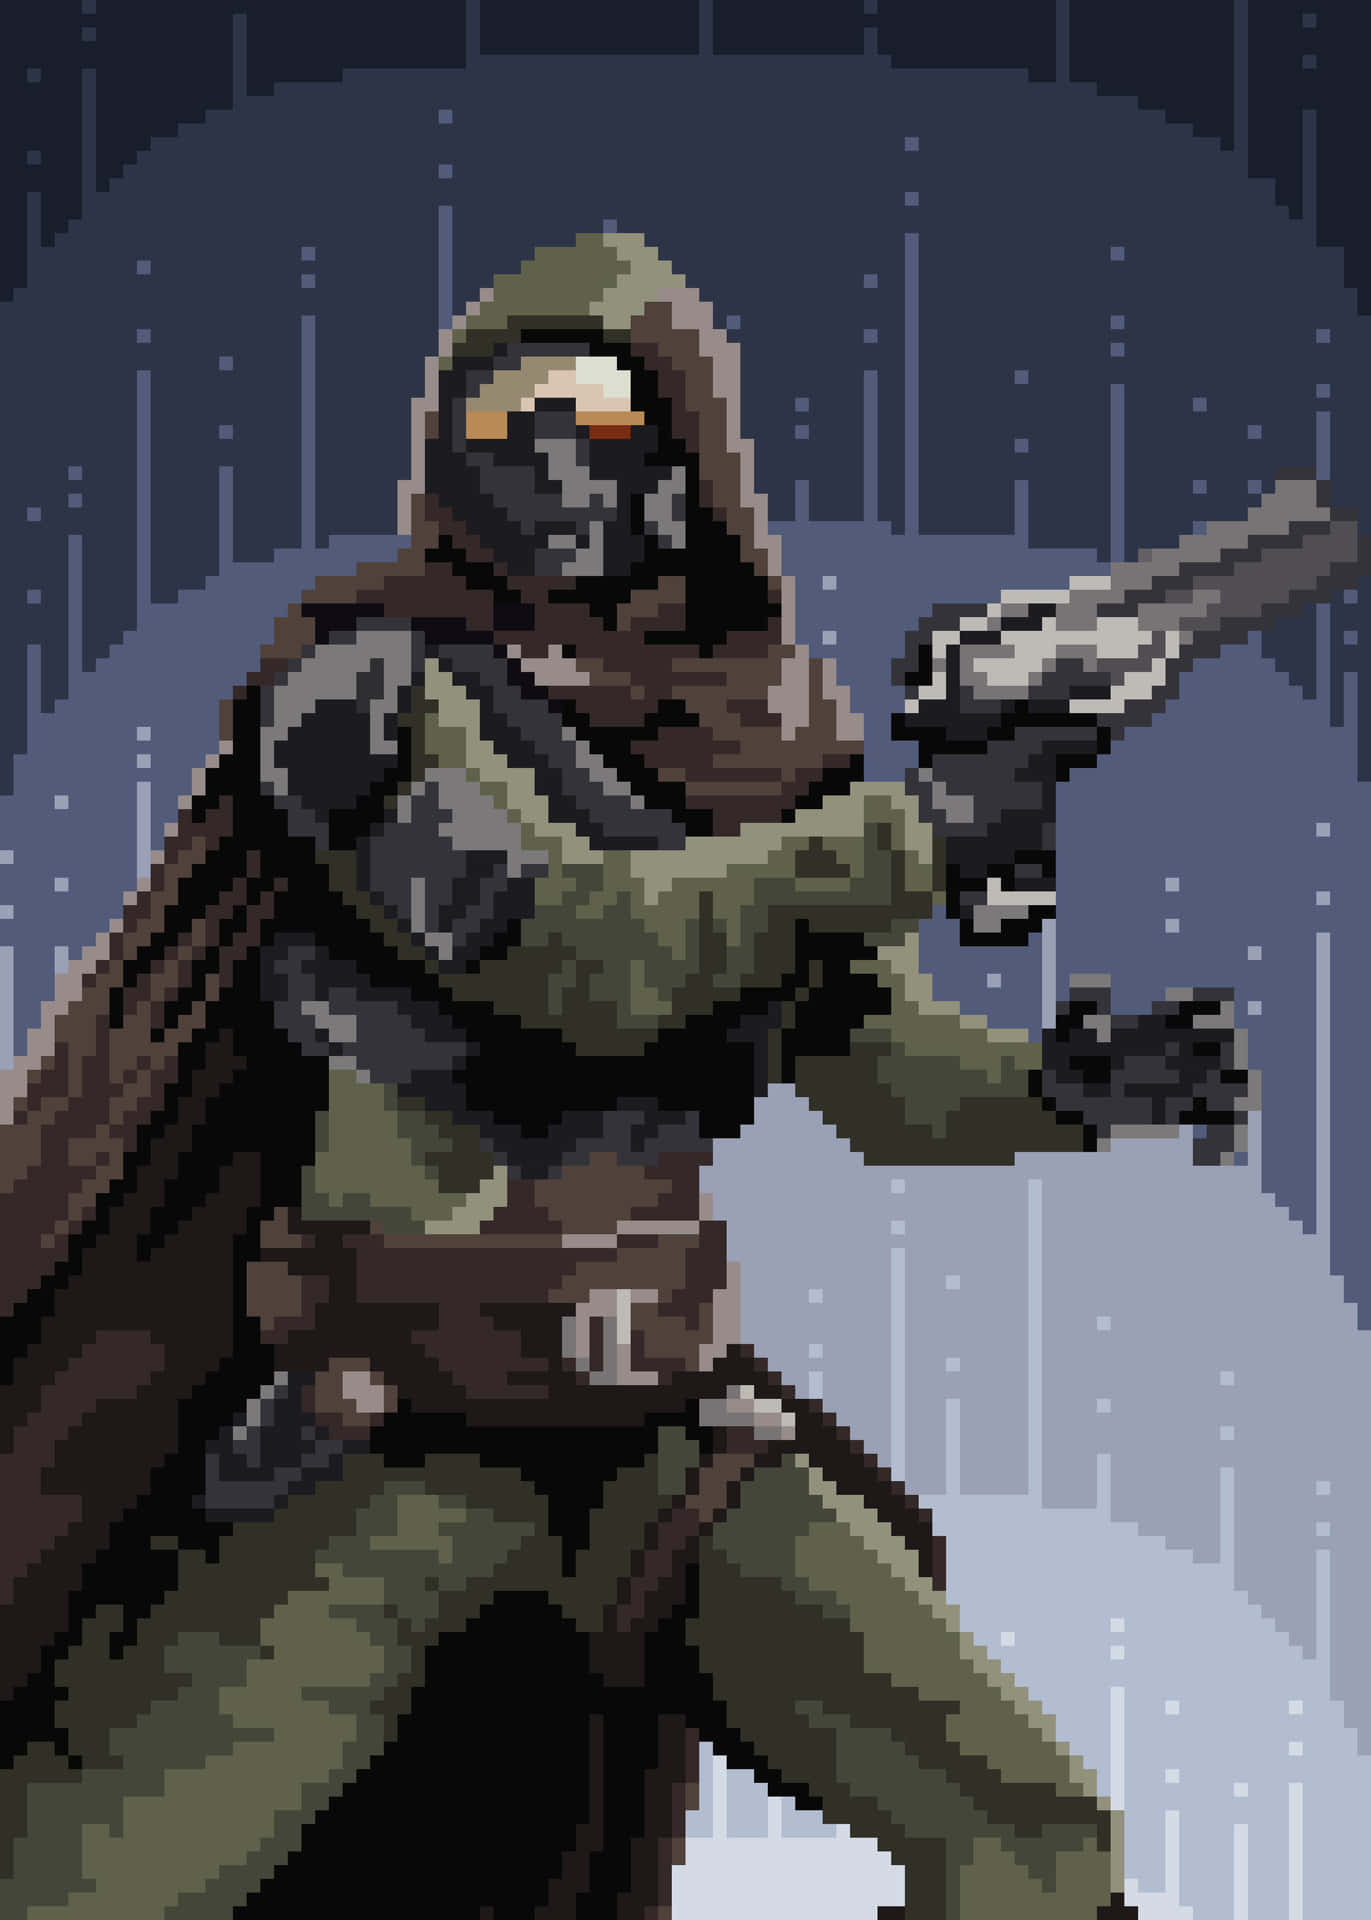 Pixel Art of the Guardians of the Last City from Destiny Wallpaper